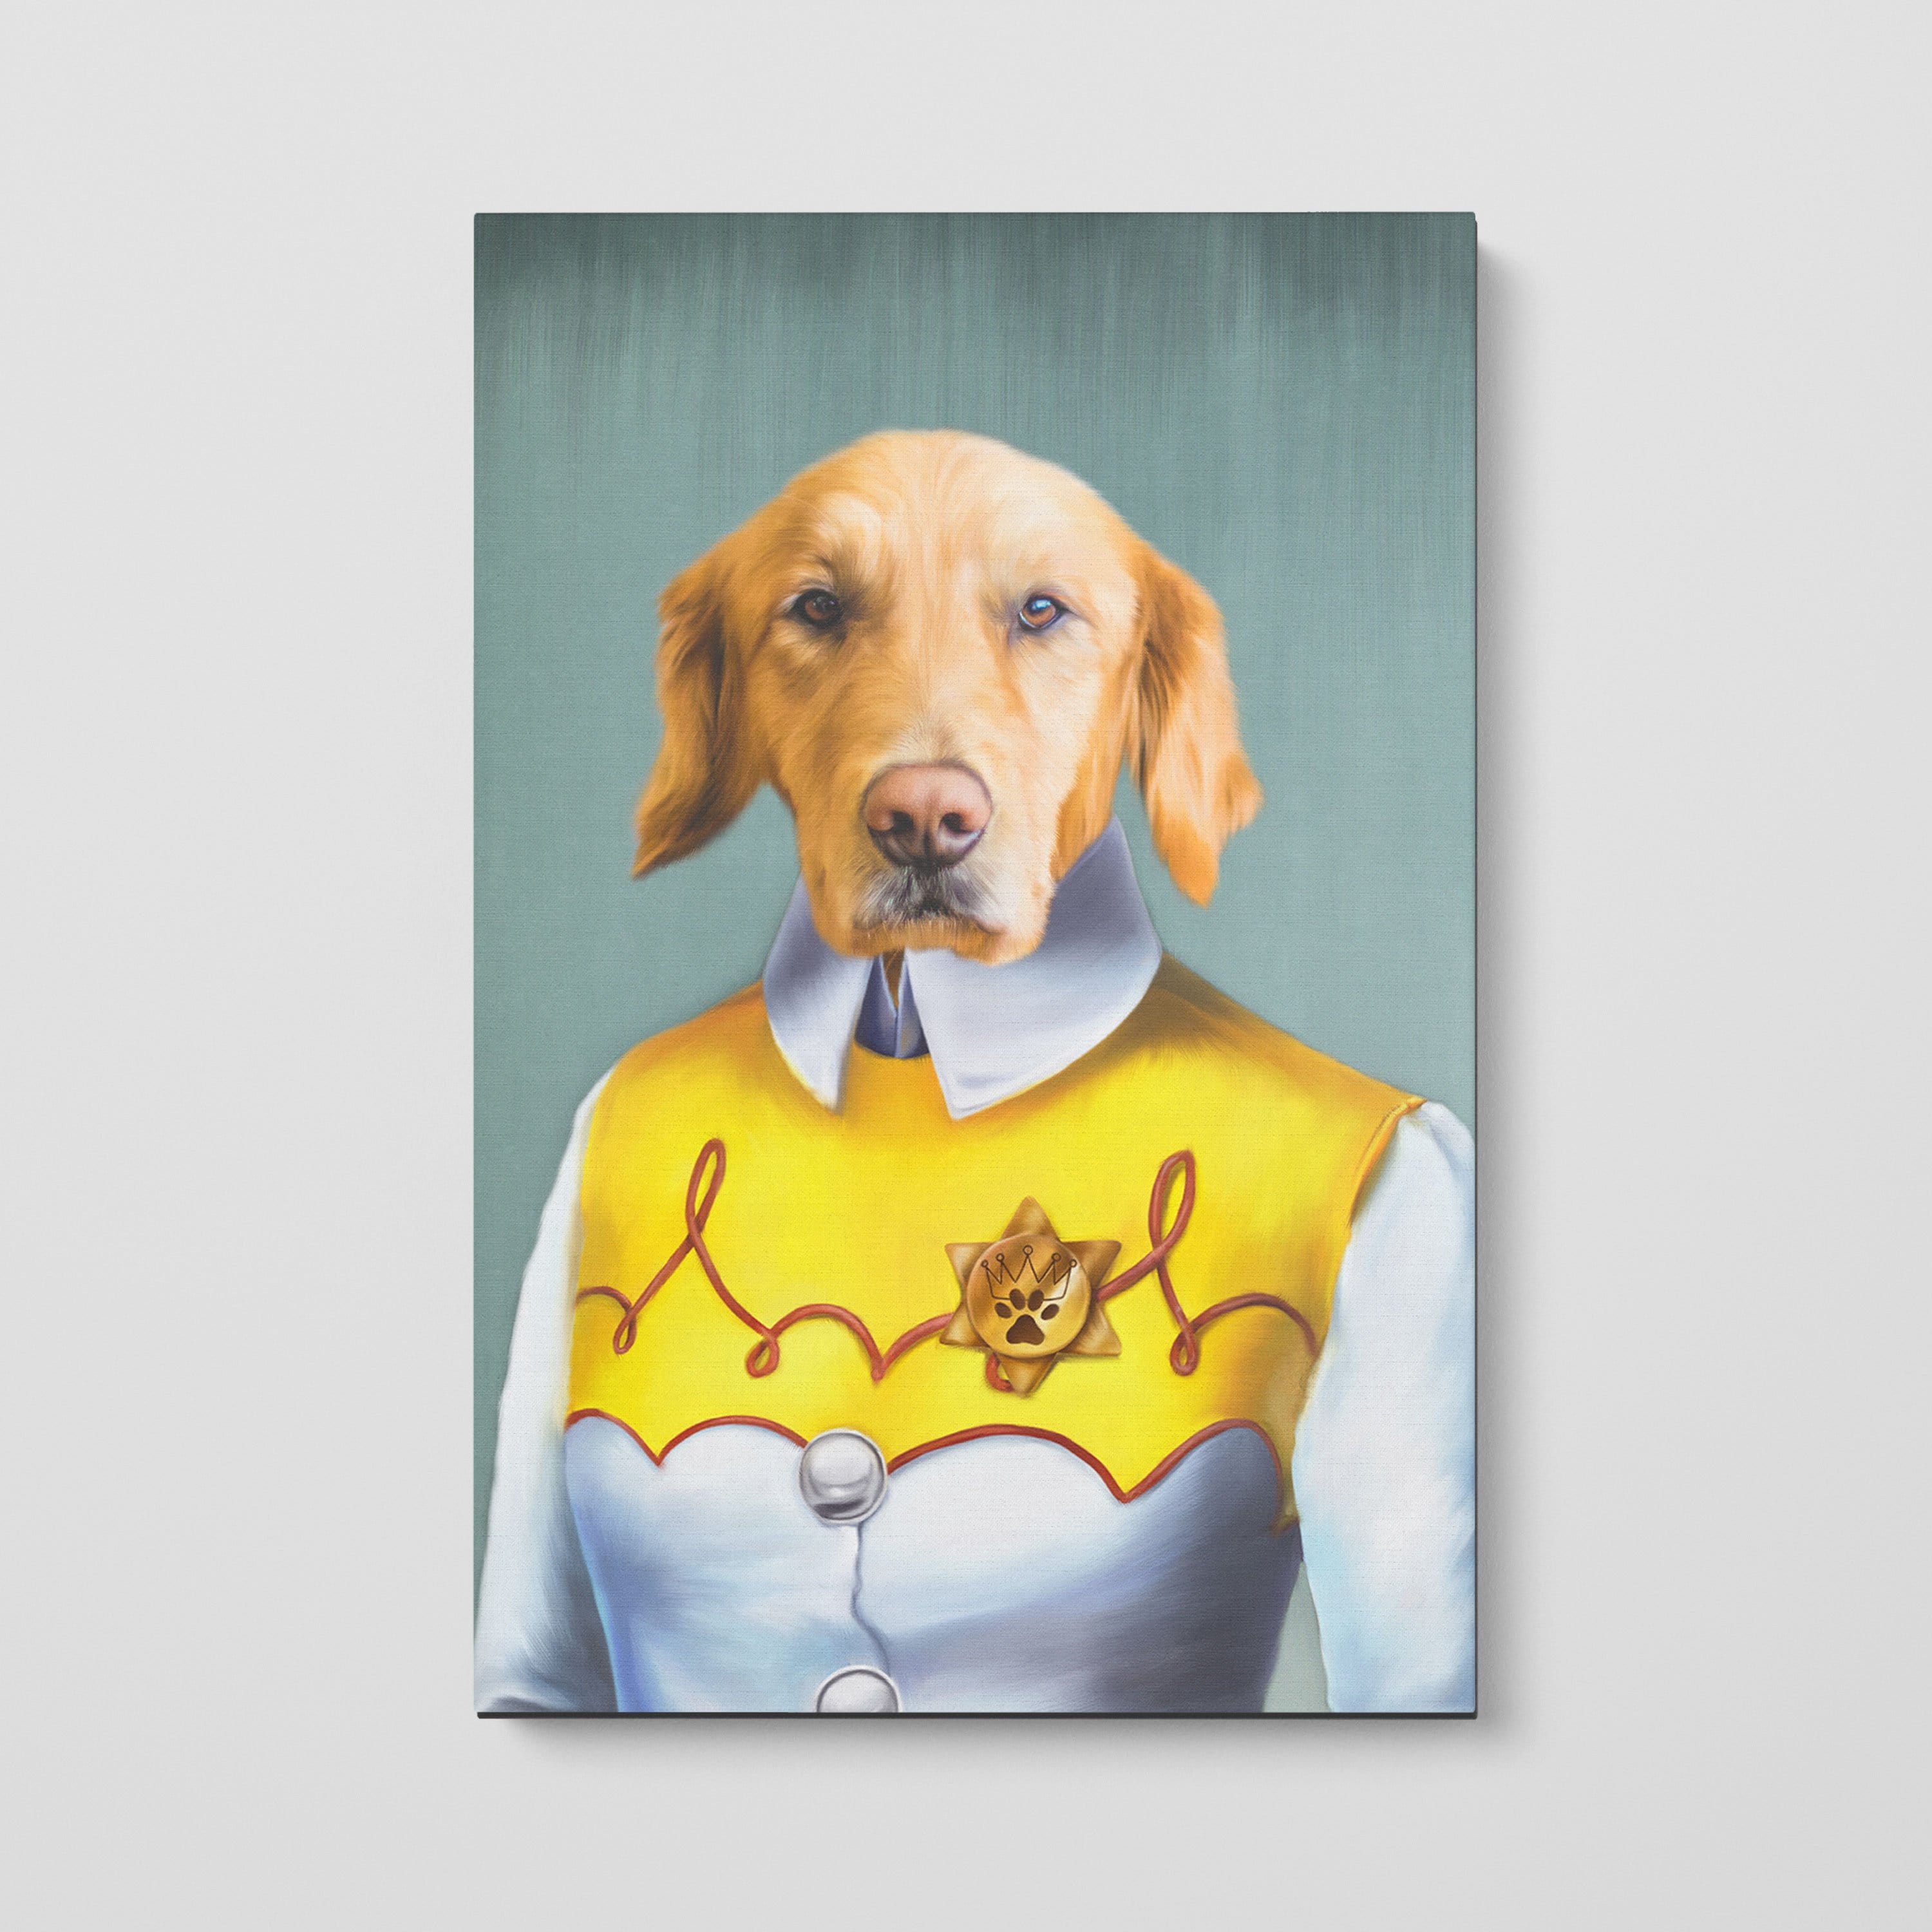 The Cowgirl - Custom Pet Canvas